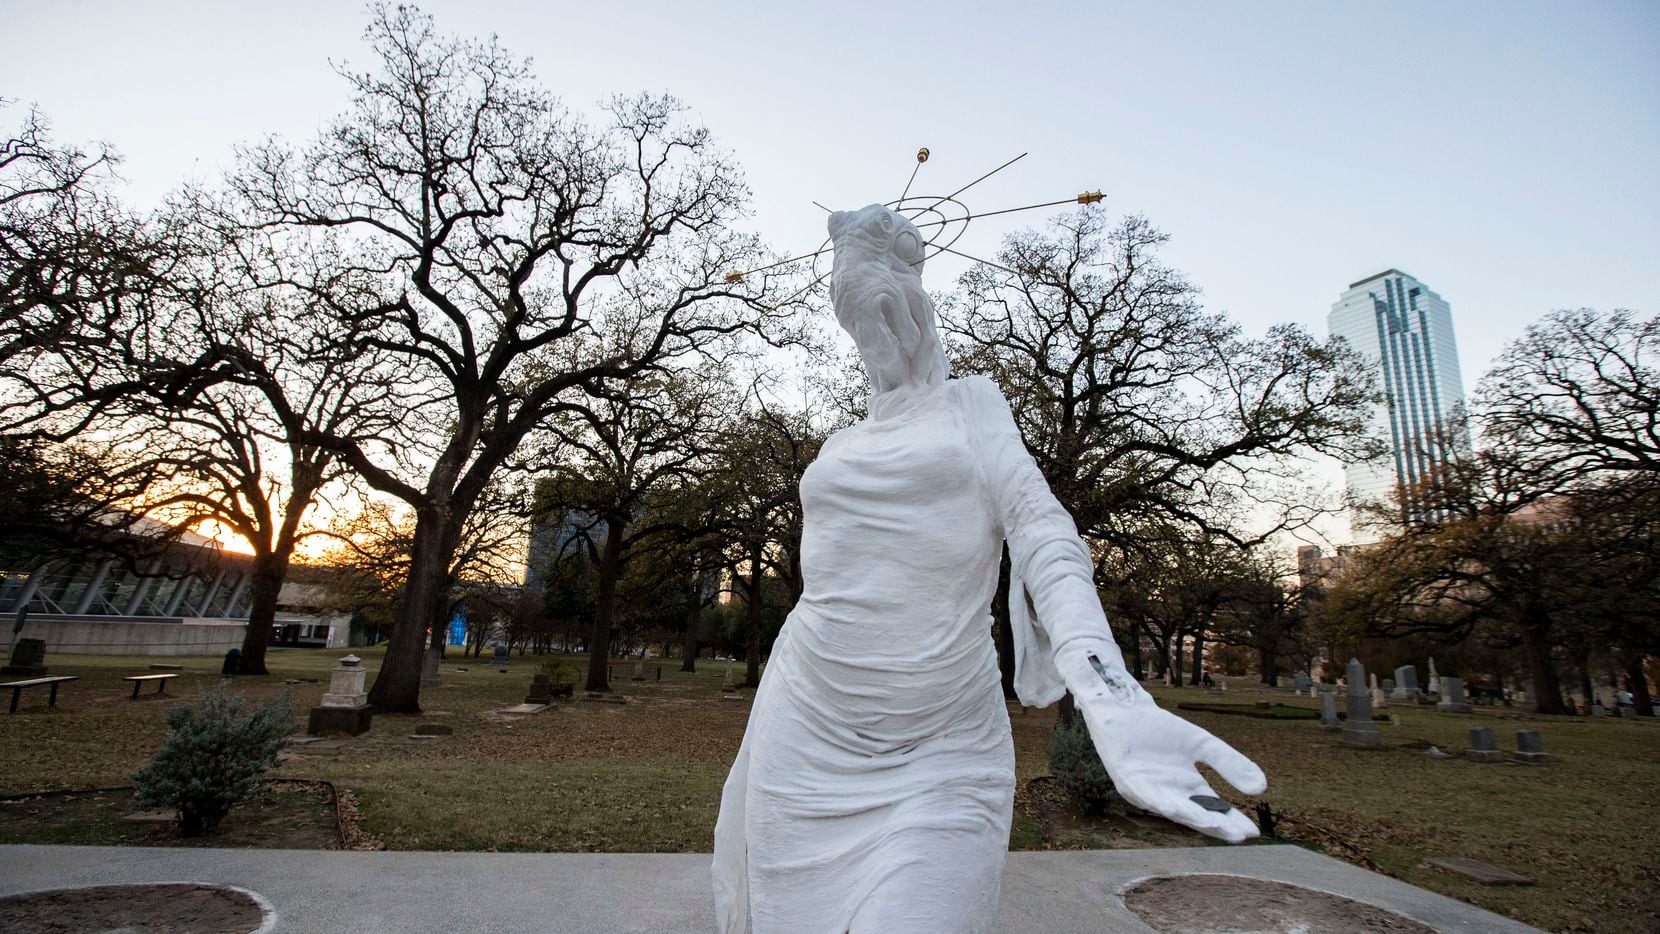 A statue erected without city permission was spotted Monday on the site of the former...